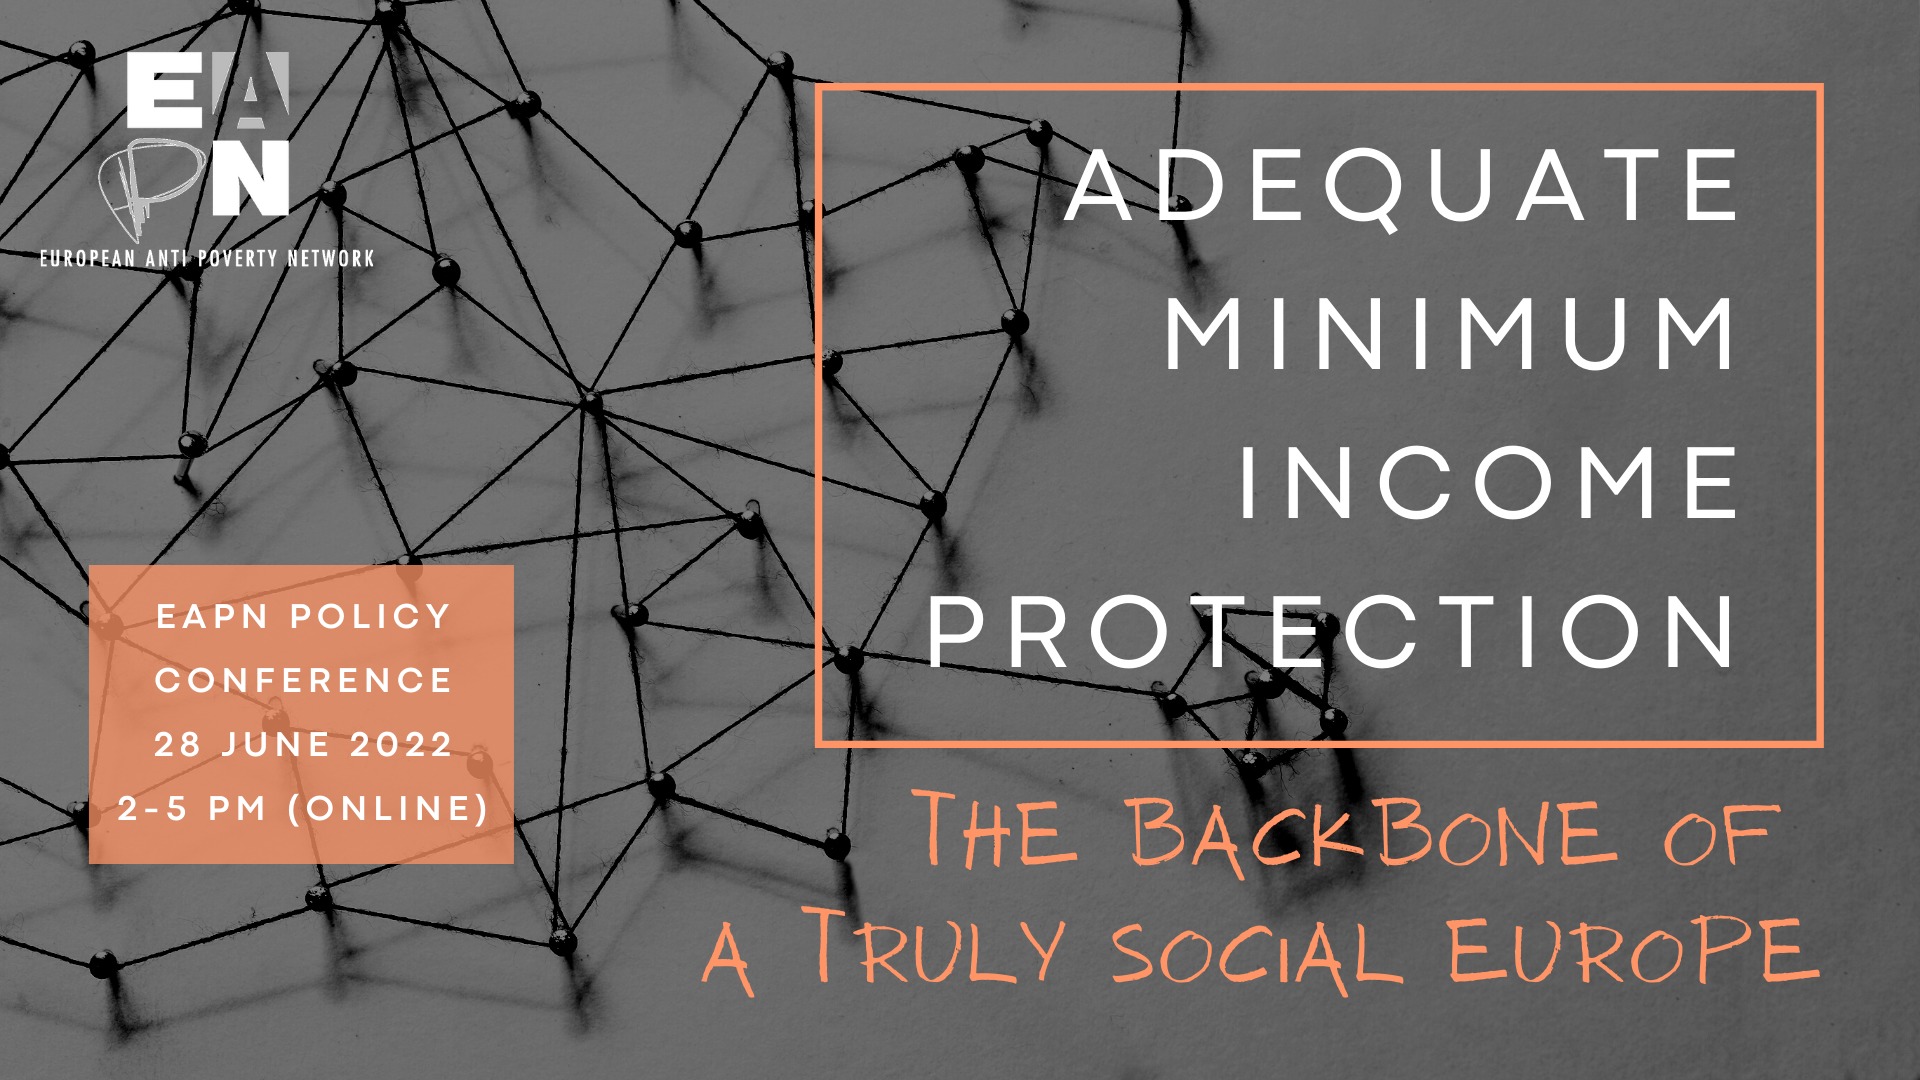 [Online] Adequate Minimum Income Protection: The Backbone of a Truly Social Europe